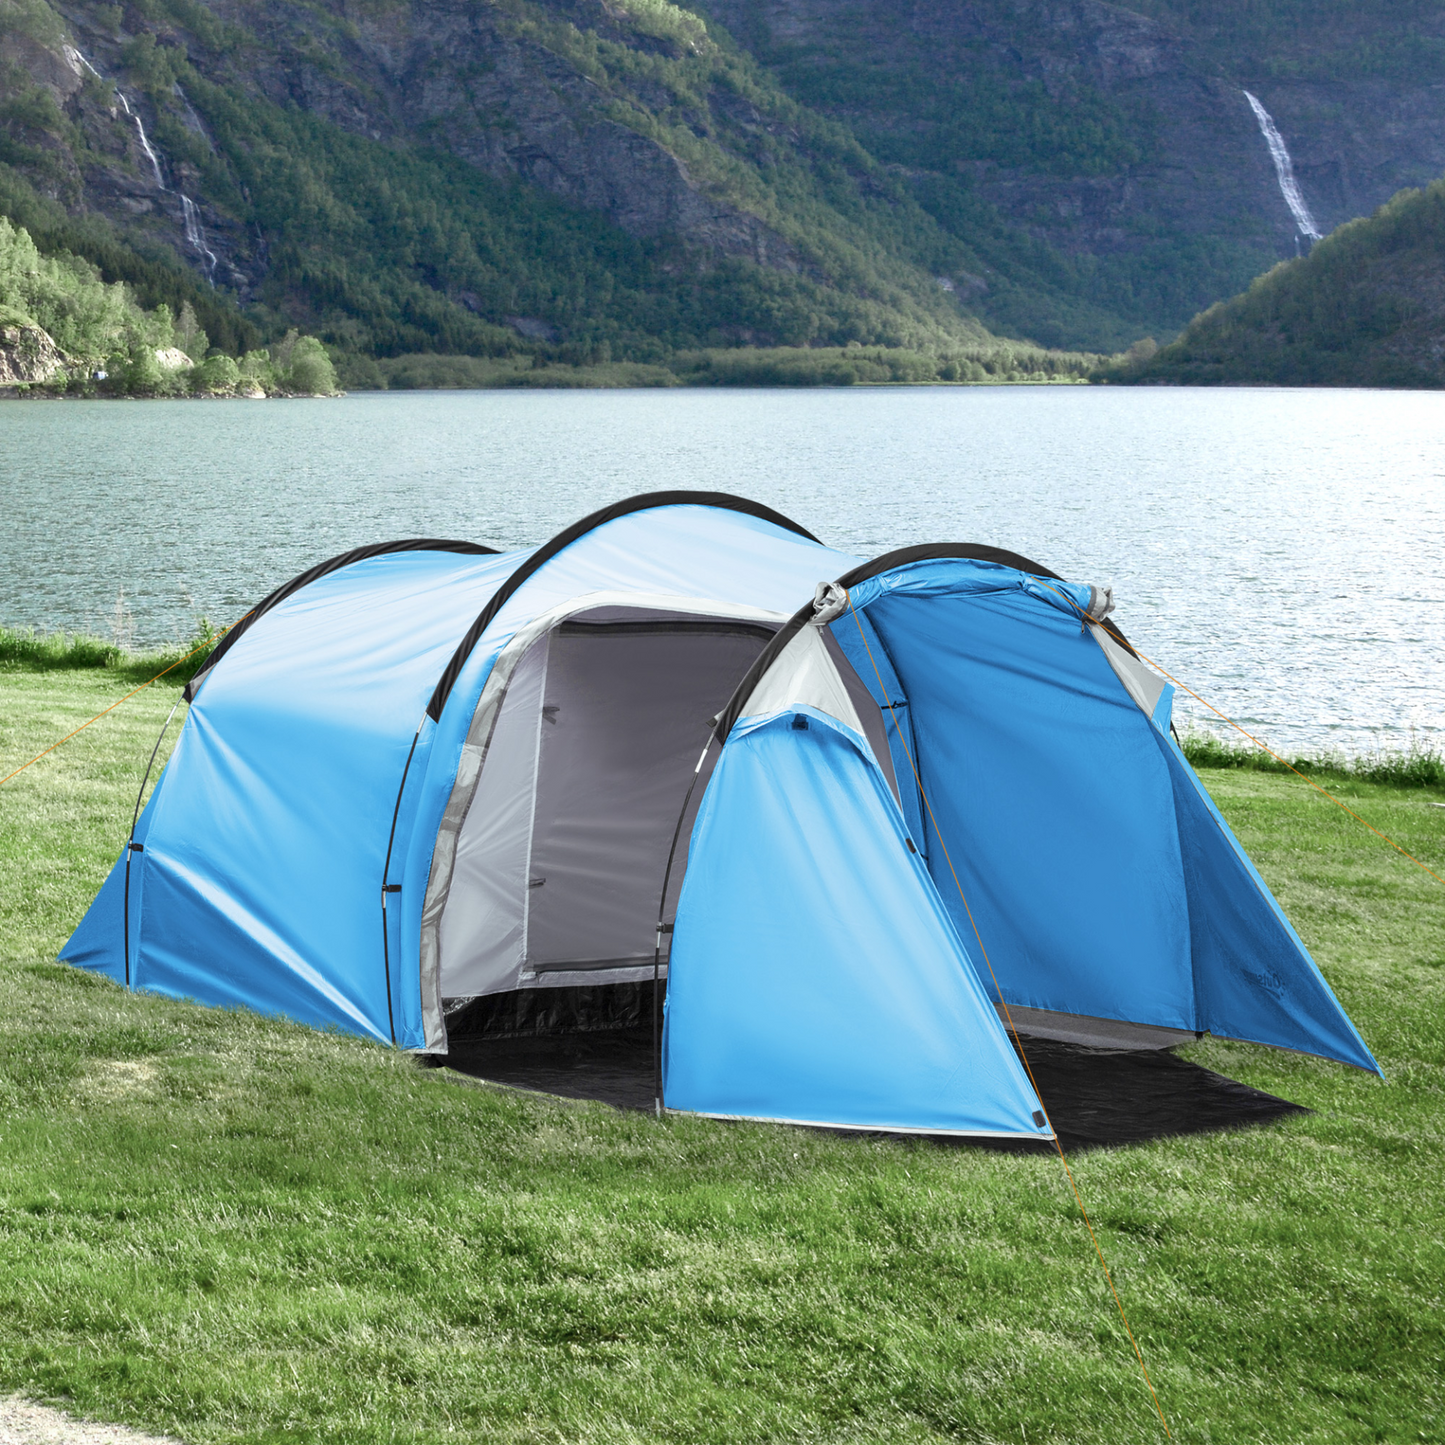 Outsunny 2-3 Man Tunnel Tents w/ Vestibule Camping Tent Porch Air Vents Rainfly Weather-Resistant Shelter Fishing Hiking Festival Shelter Home, Light Blue